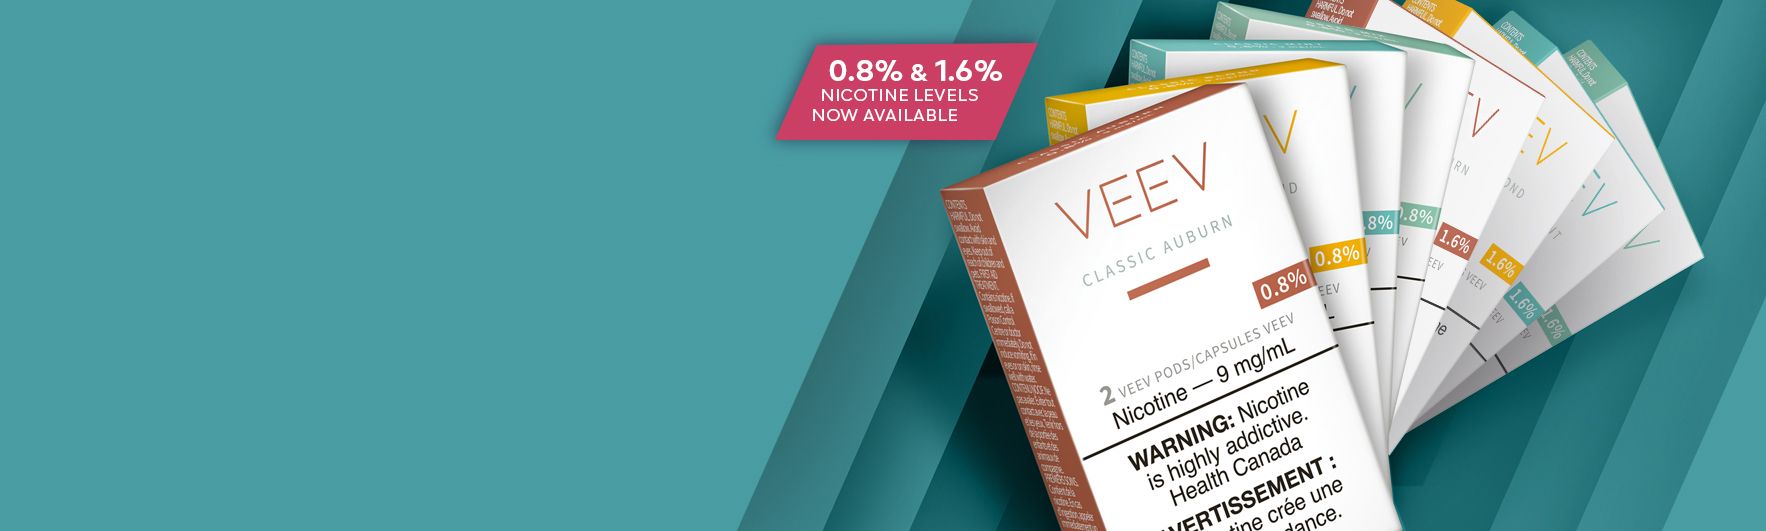 0.8% (9 mg/ml) Nicotine Level VEEV Pods NOW Available in Canada